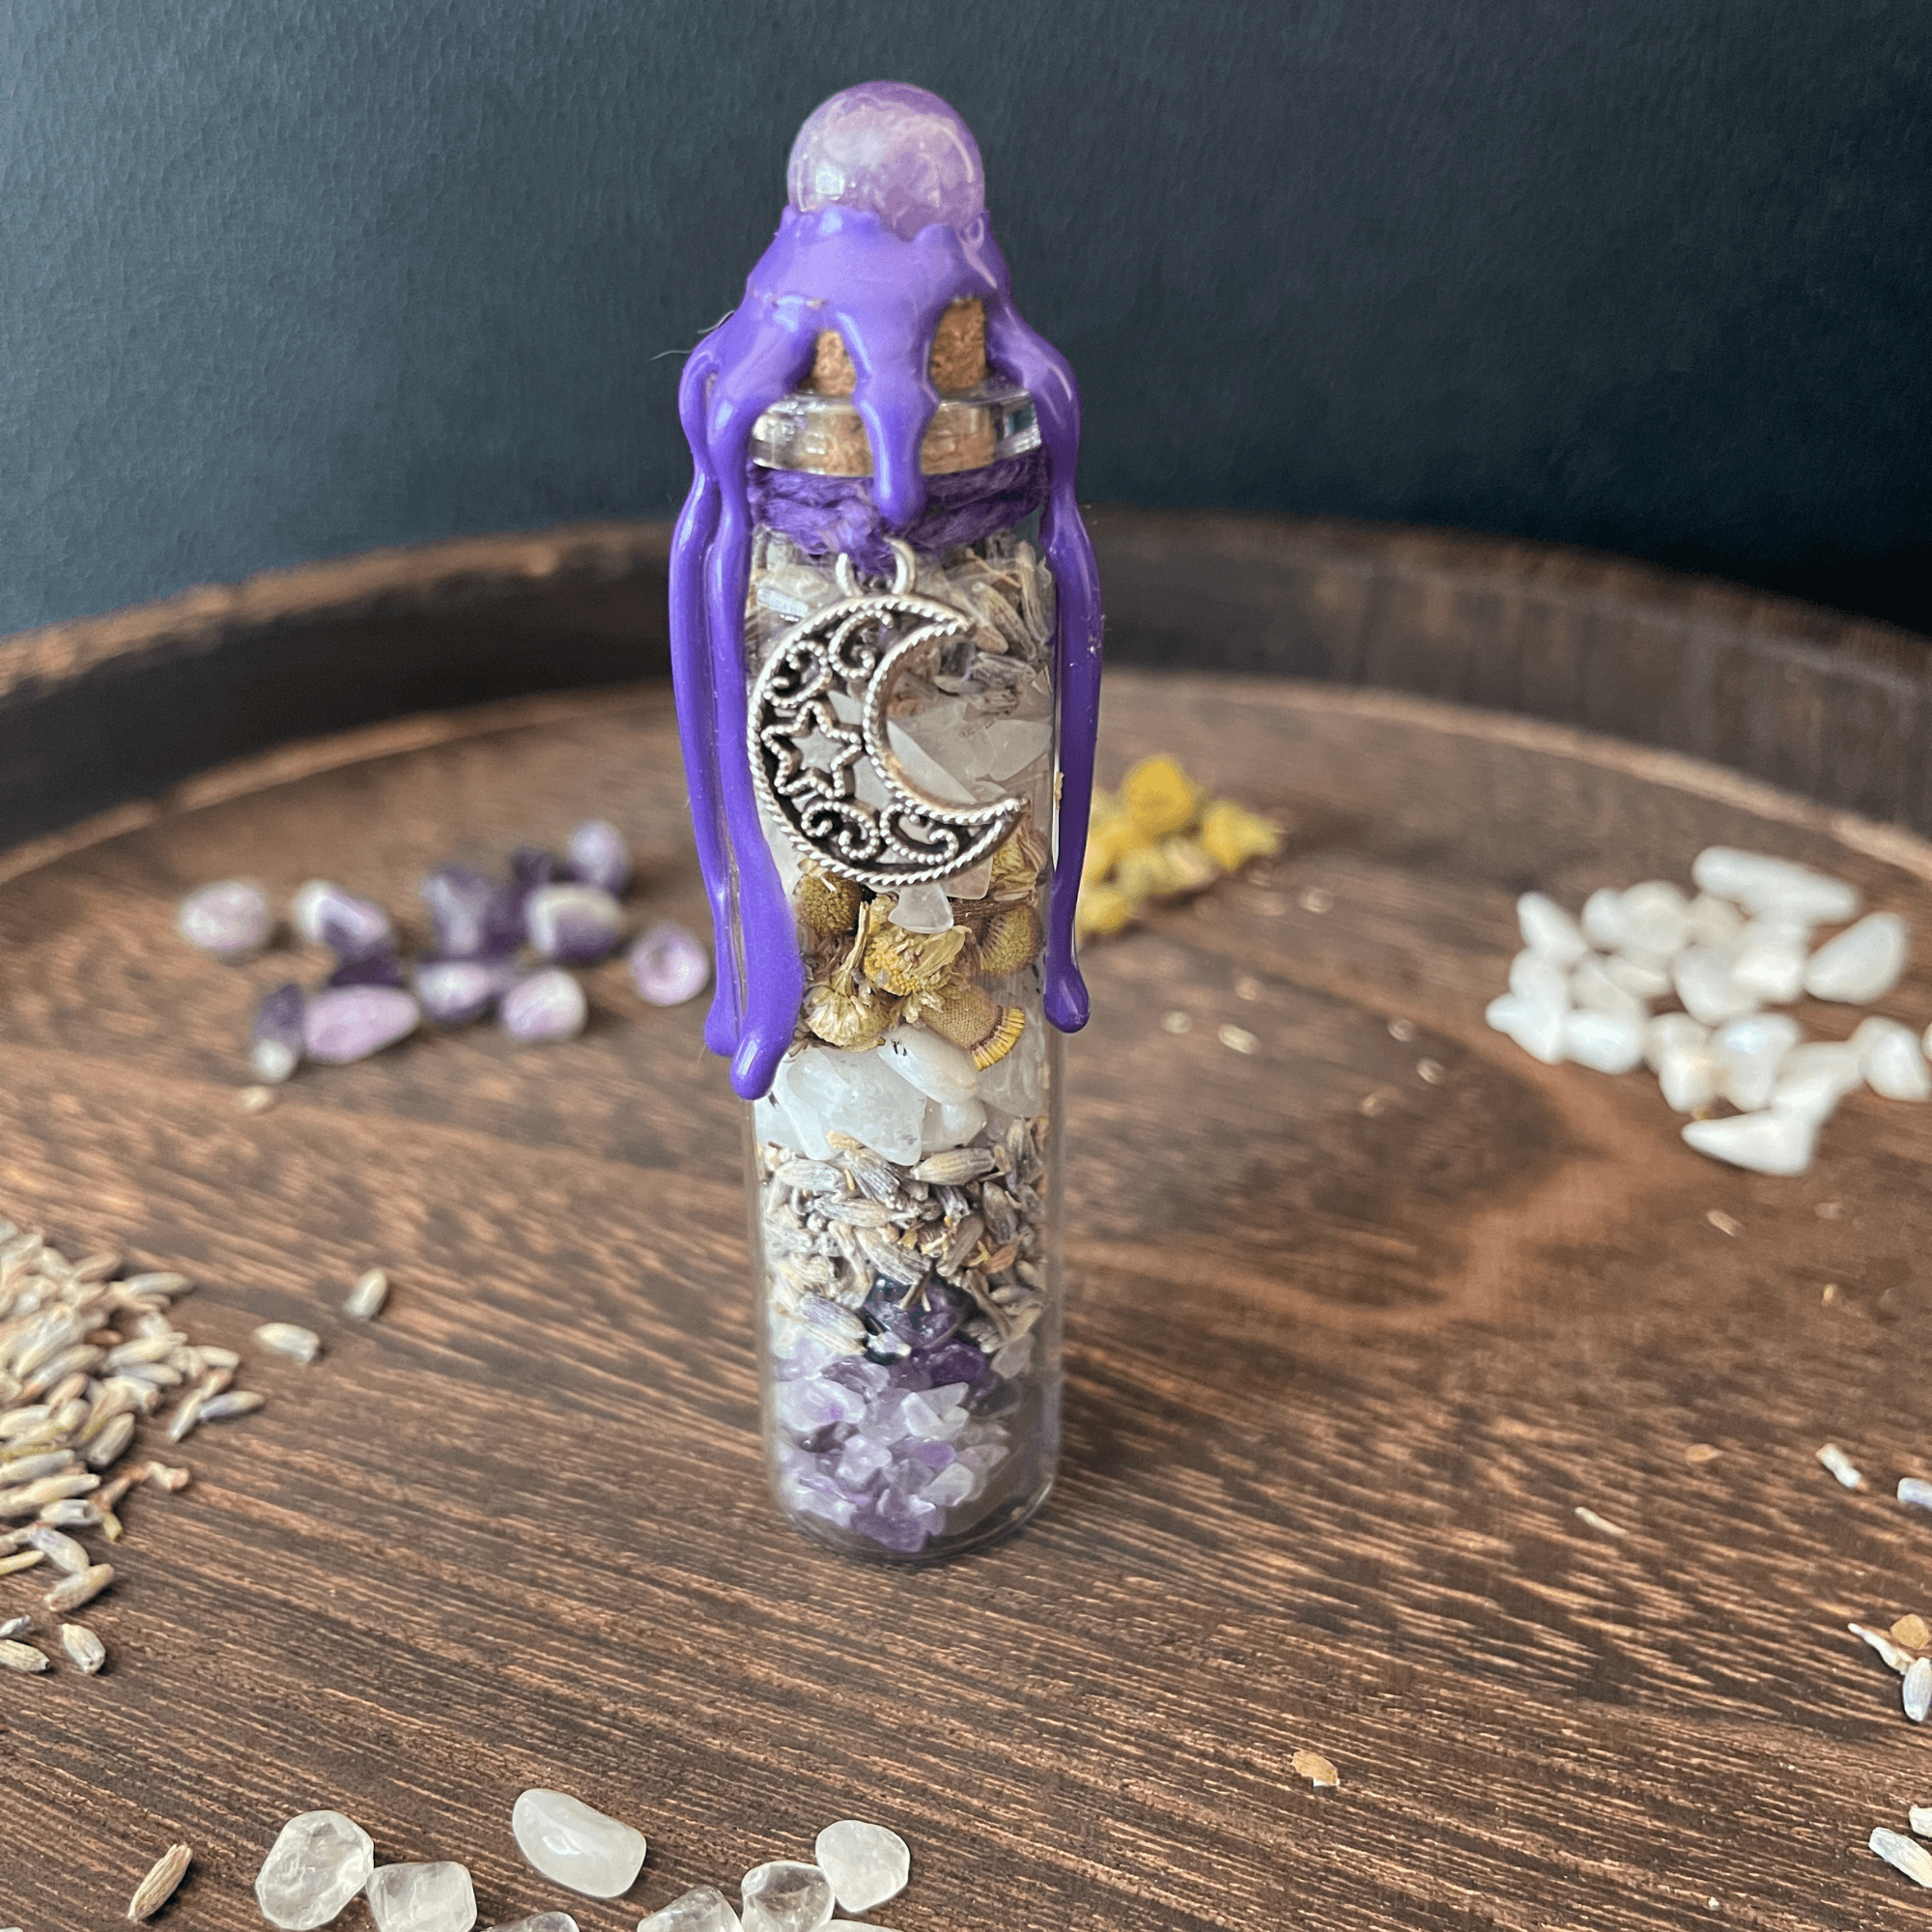 Serenity Moon Spell Jar, Intention Jar, Witch's Spell Bottle - Classic Variable